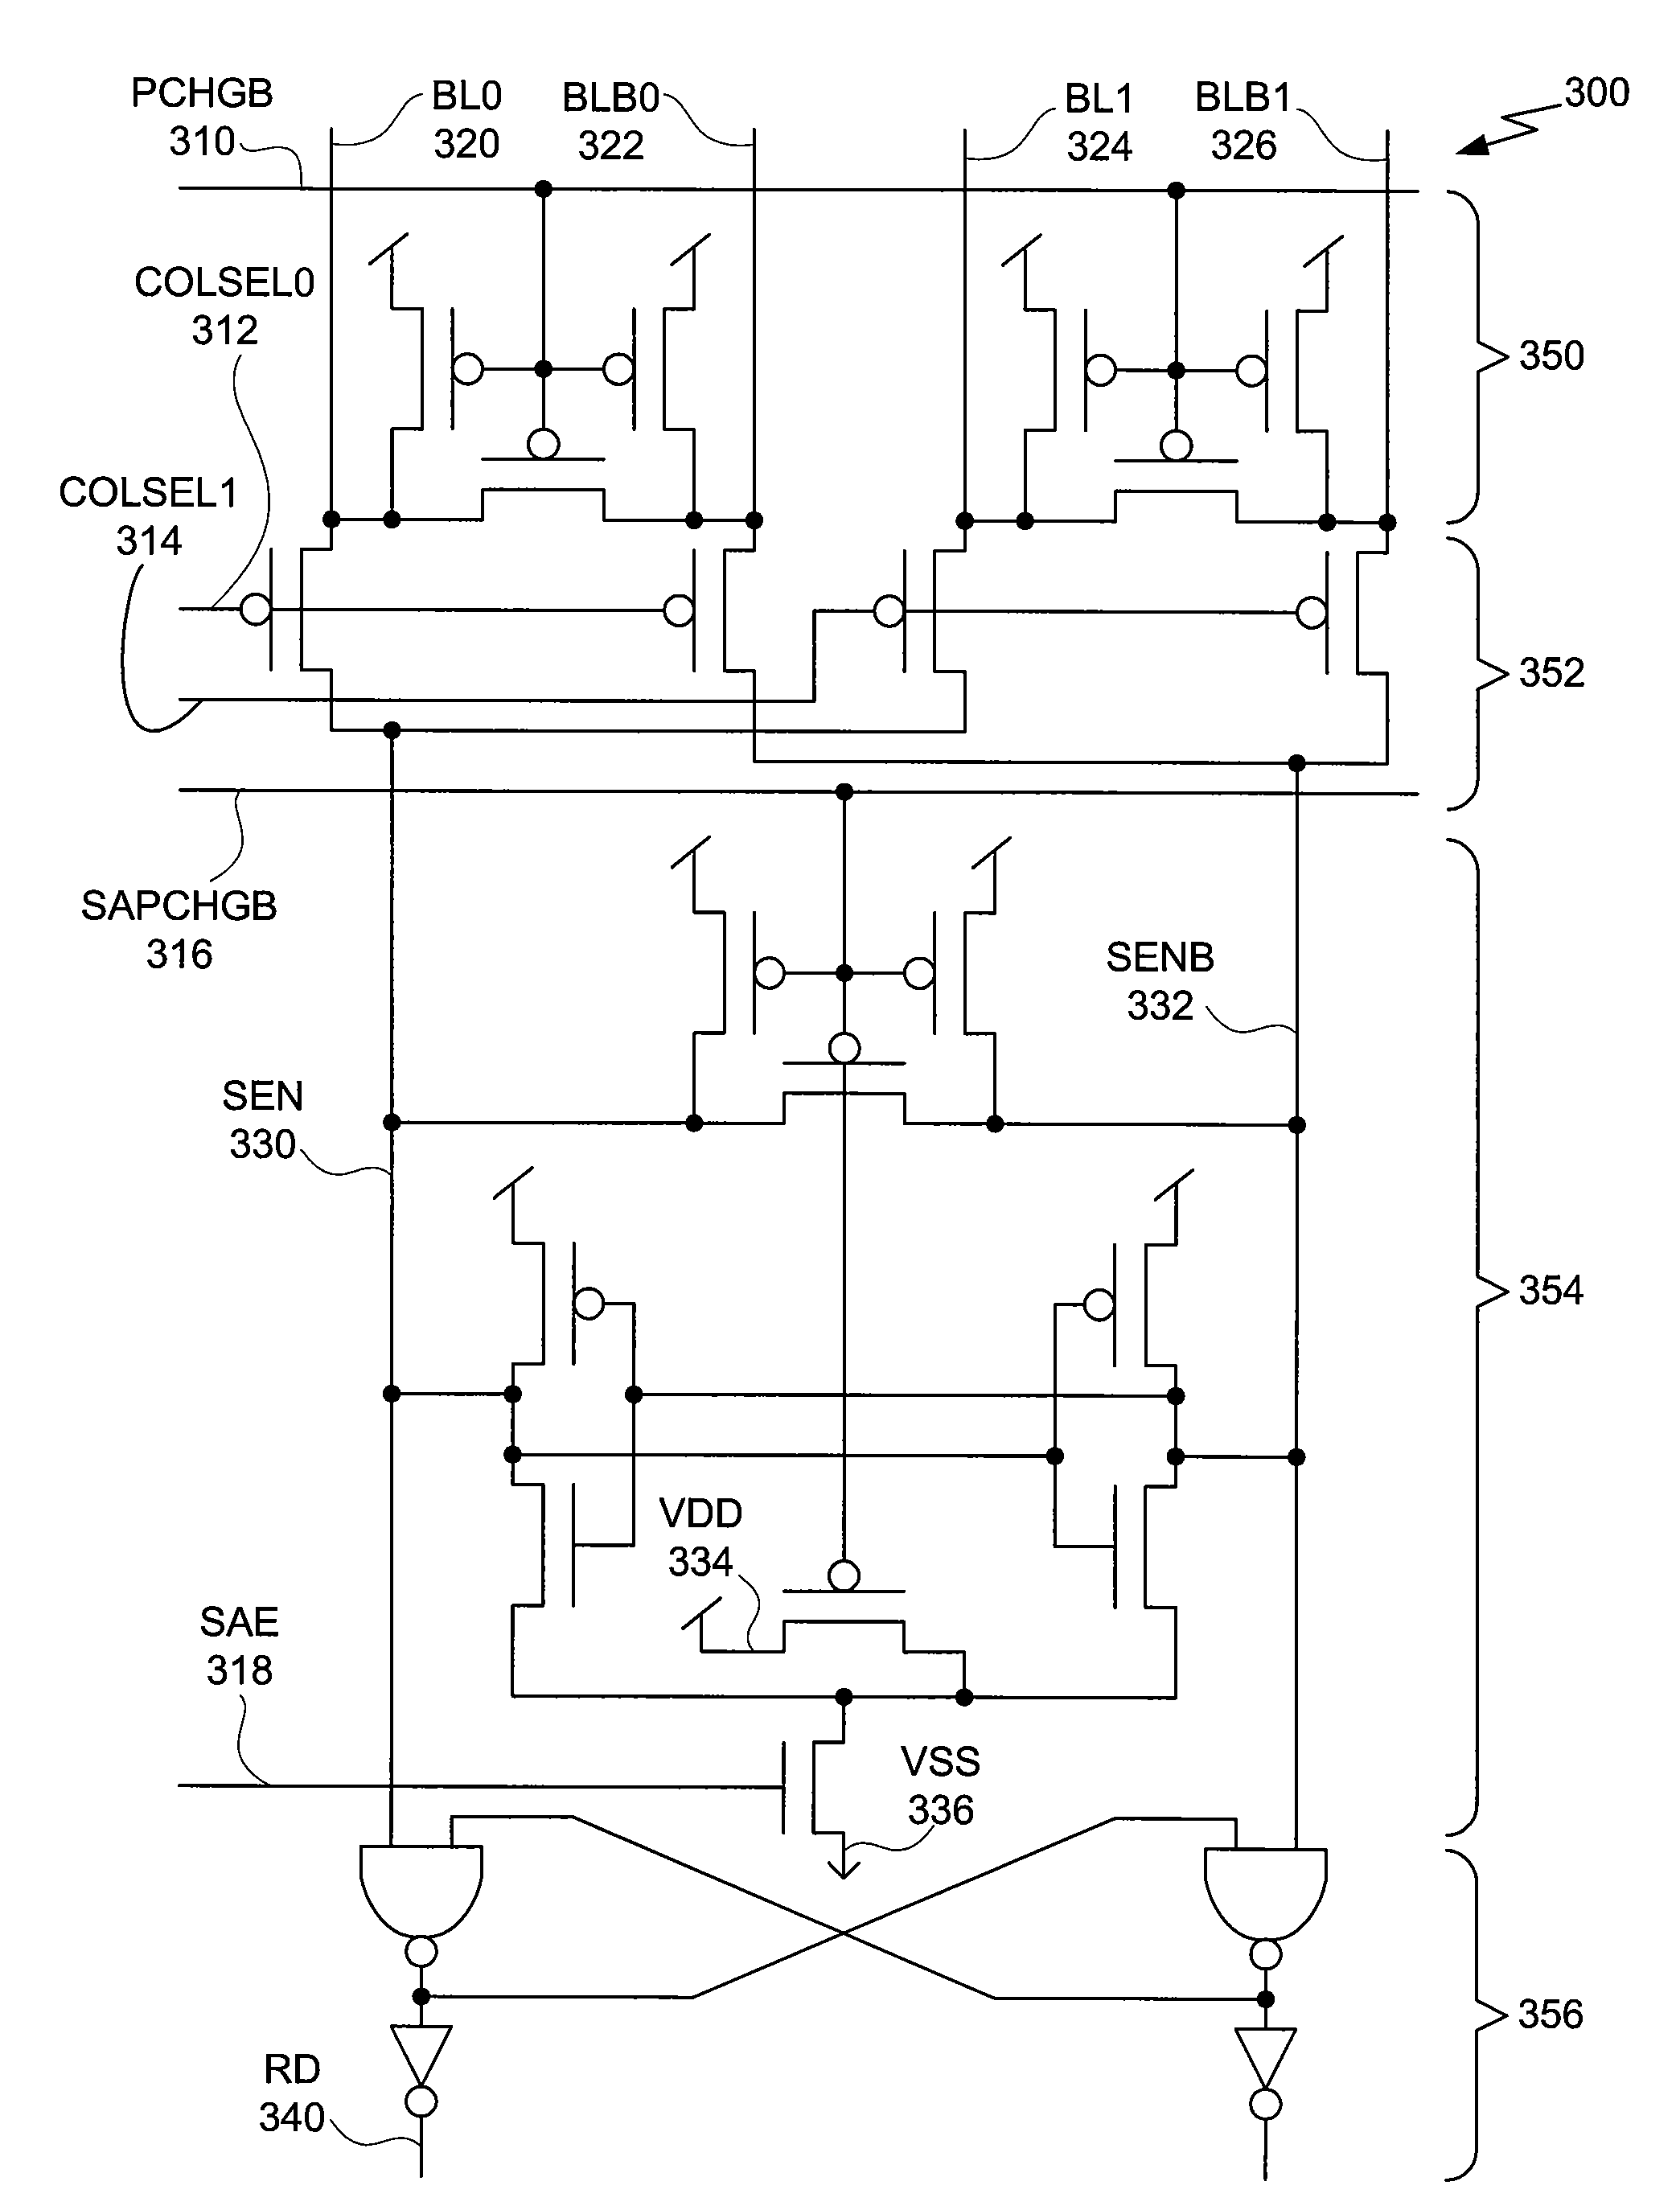 Sequentially-accessed 1R/1W double-pumped single port SRAM with shared decoder architecture